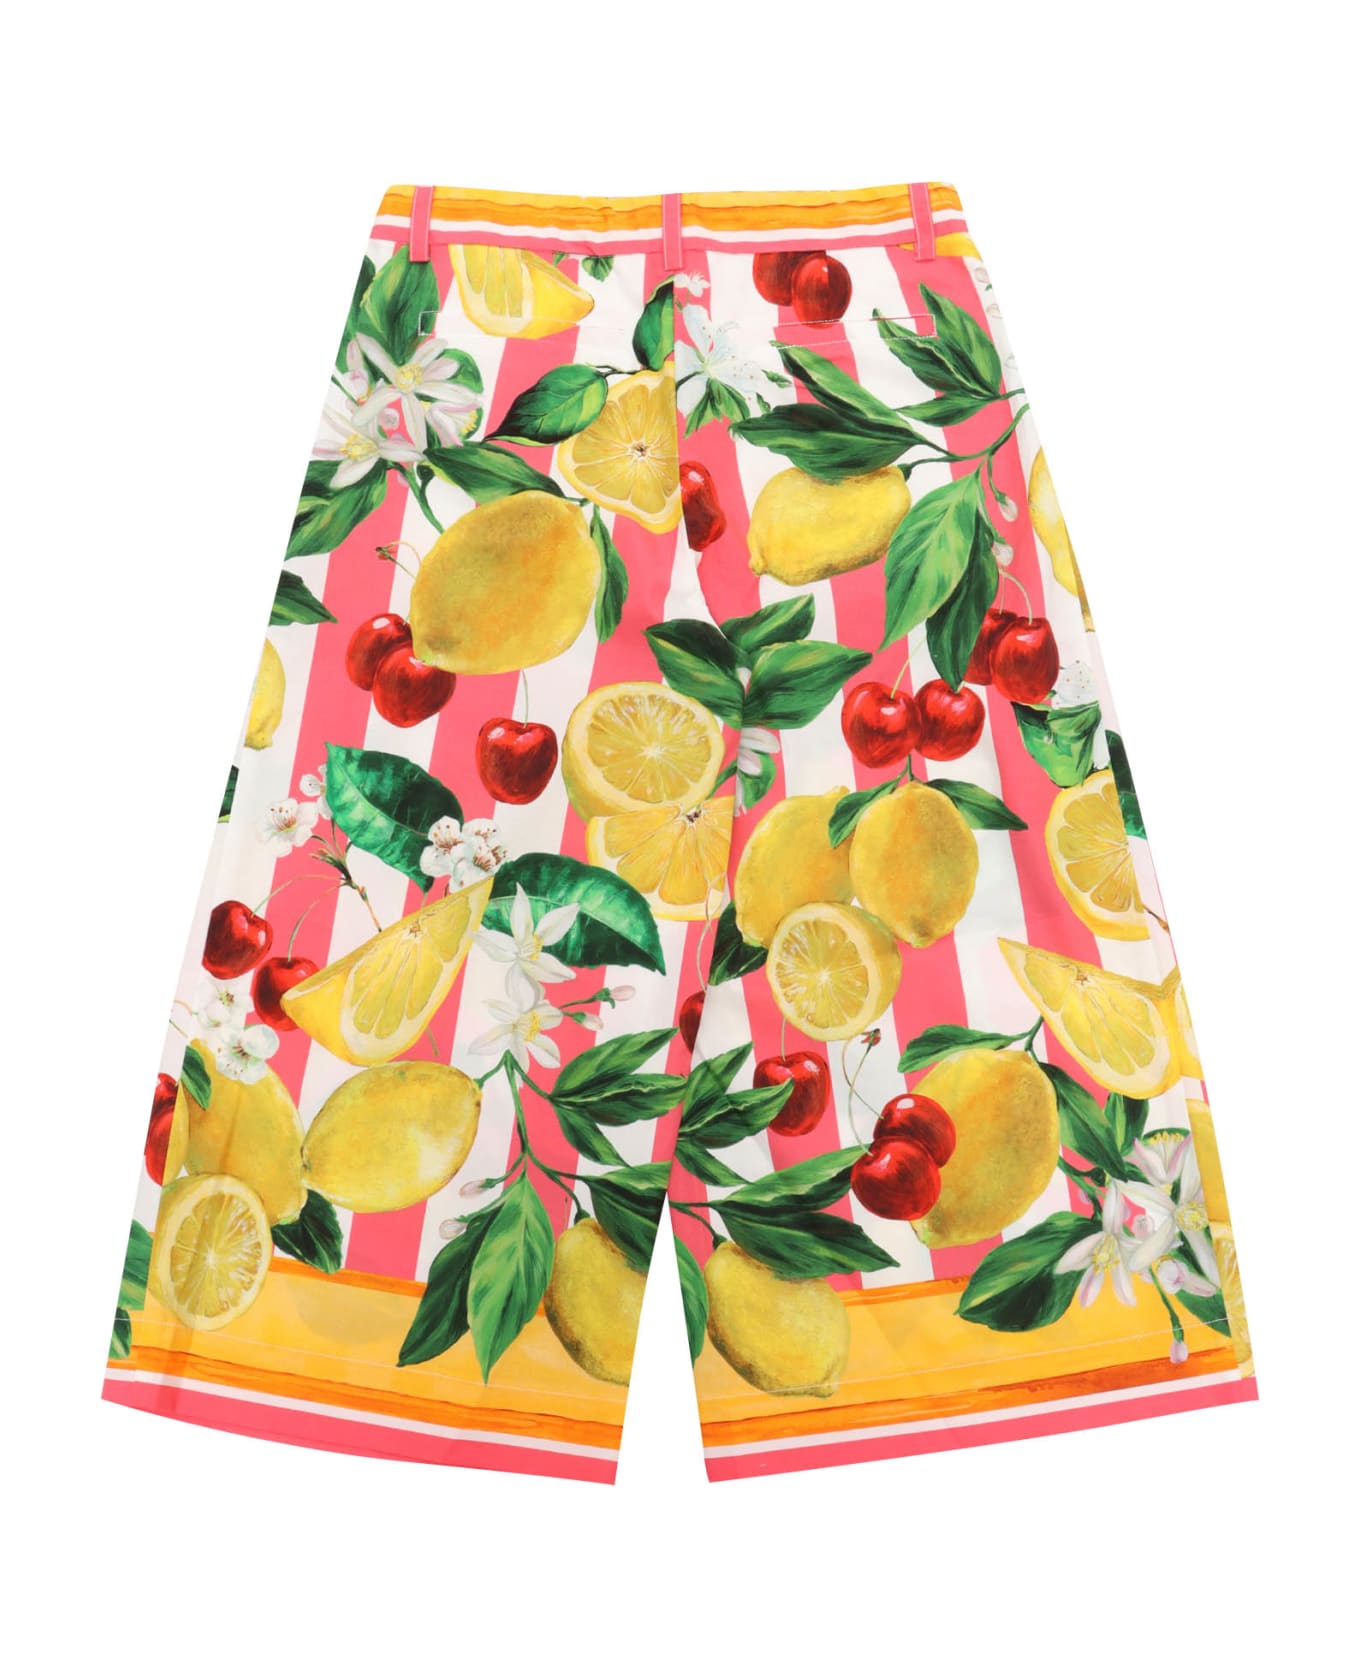 Dolce & Gabbana Colorful Trousers - YELLOW